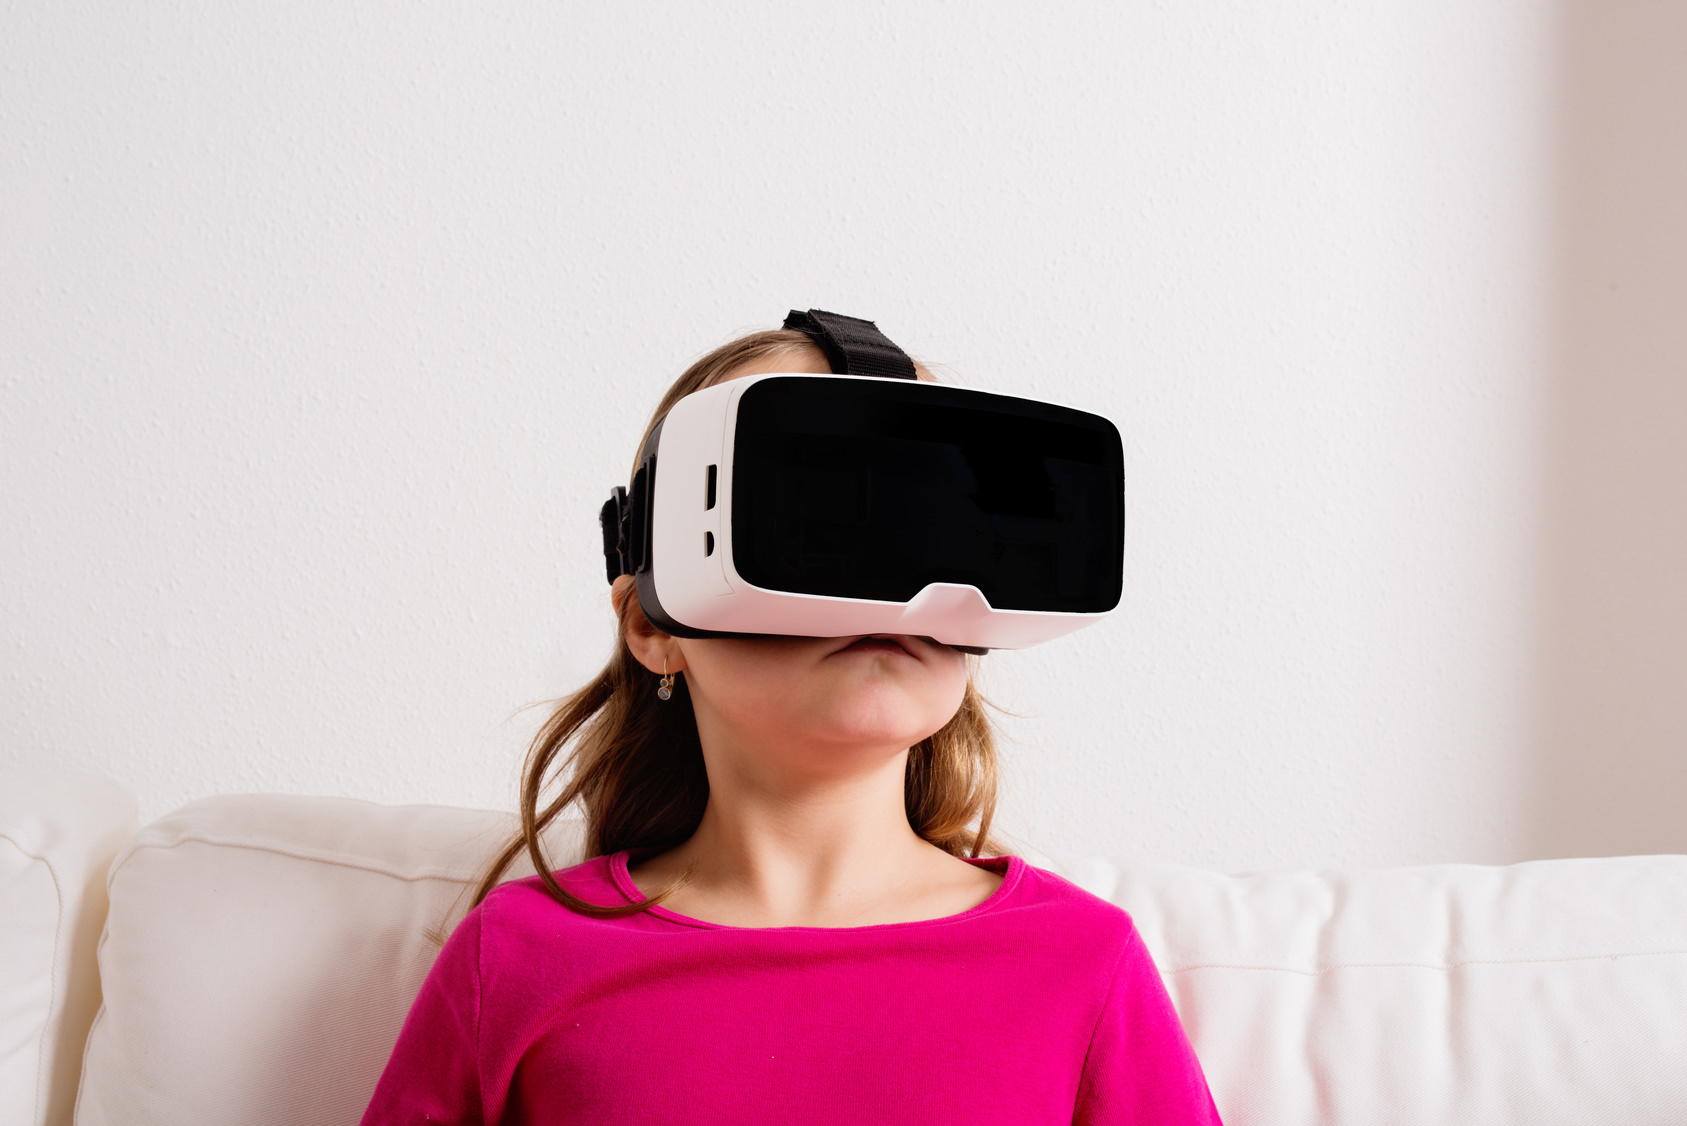 Will VR be Too Much for Kids and Their Parents?